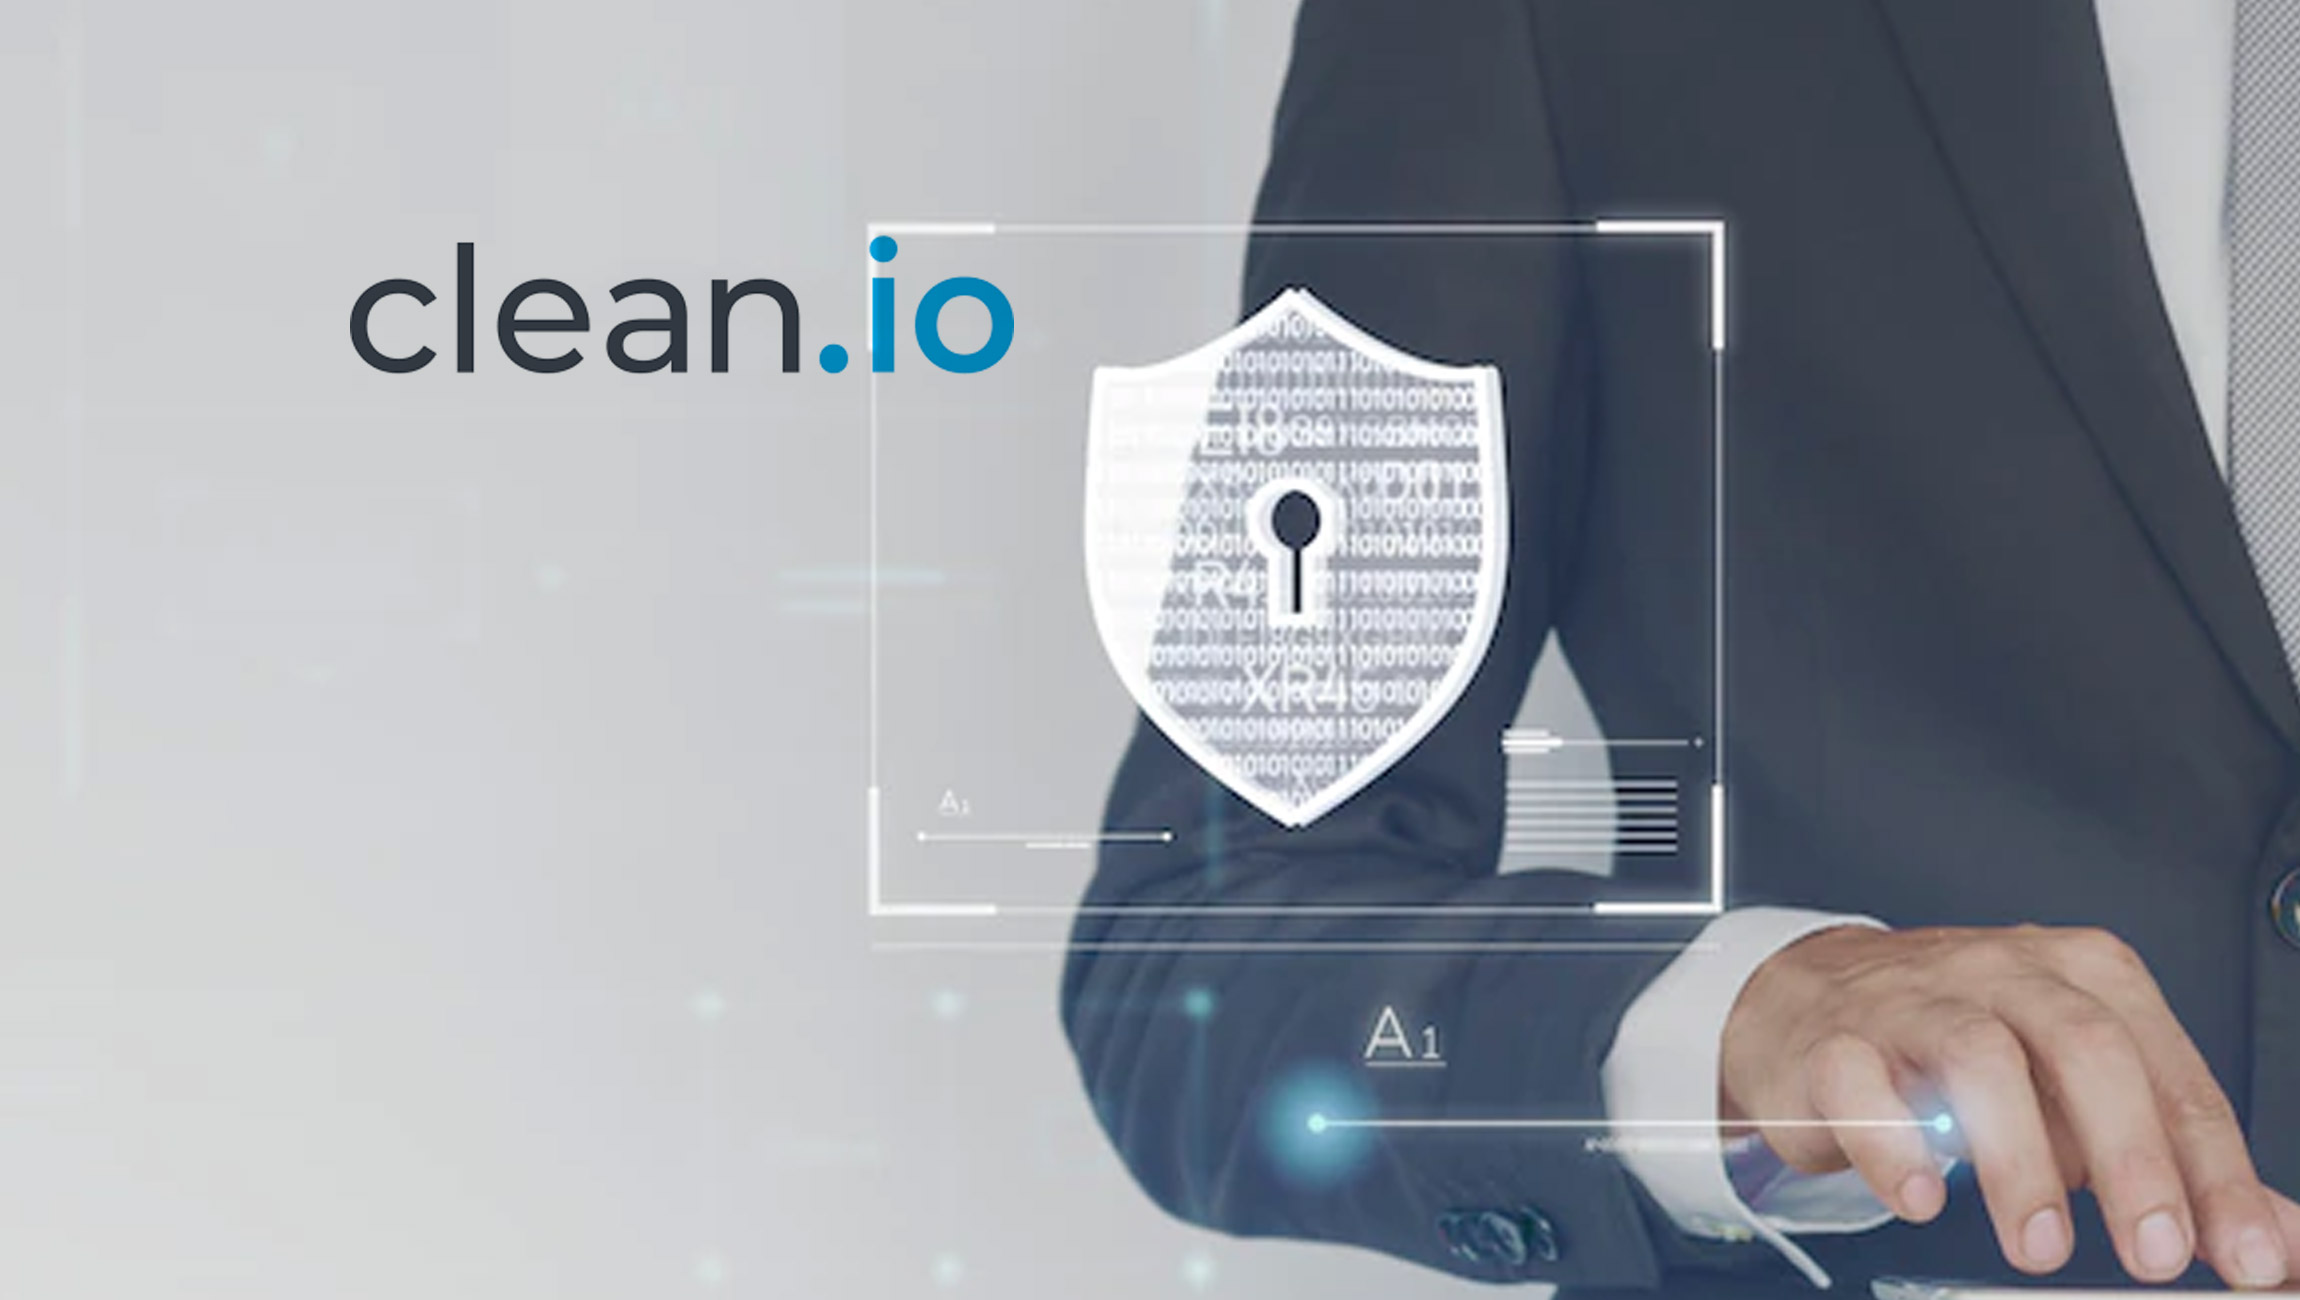 clean.io Prevents Affiliate Attribution Fraud Caused by Third-Party Coupon Extensions That Cost Merchants $3 Billion Annually 1